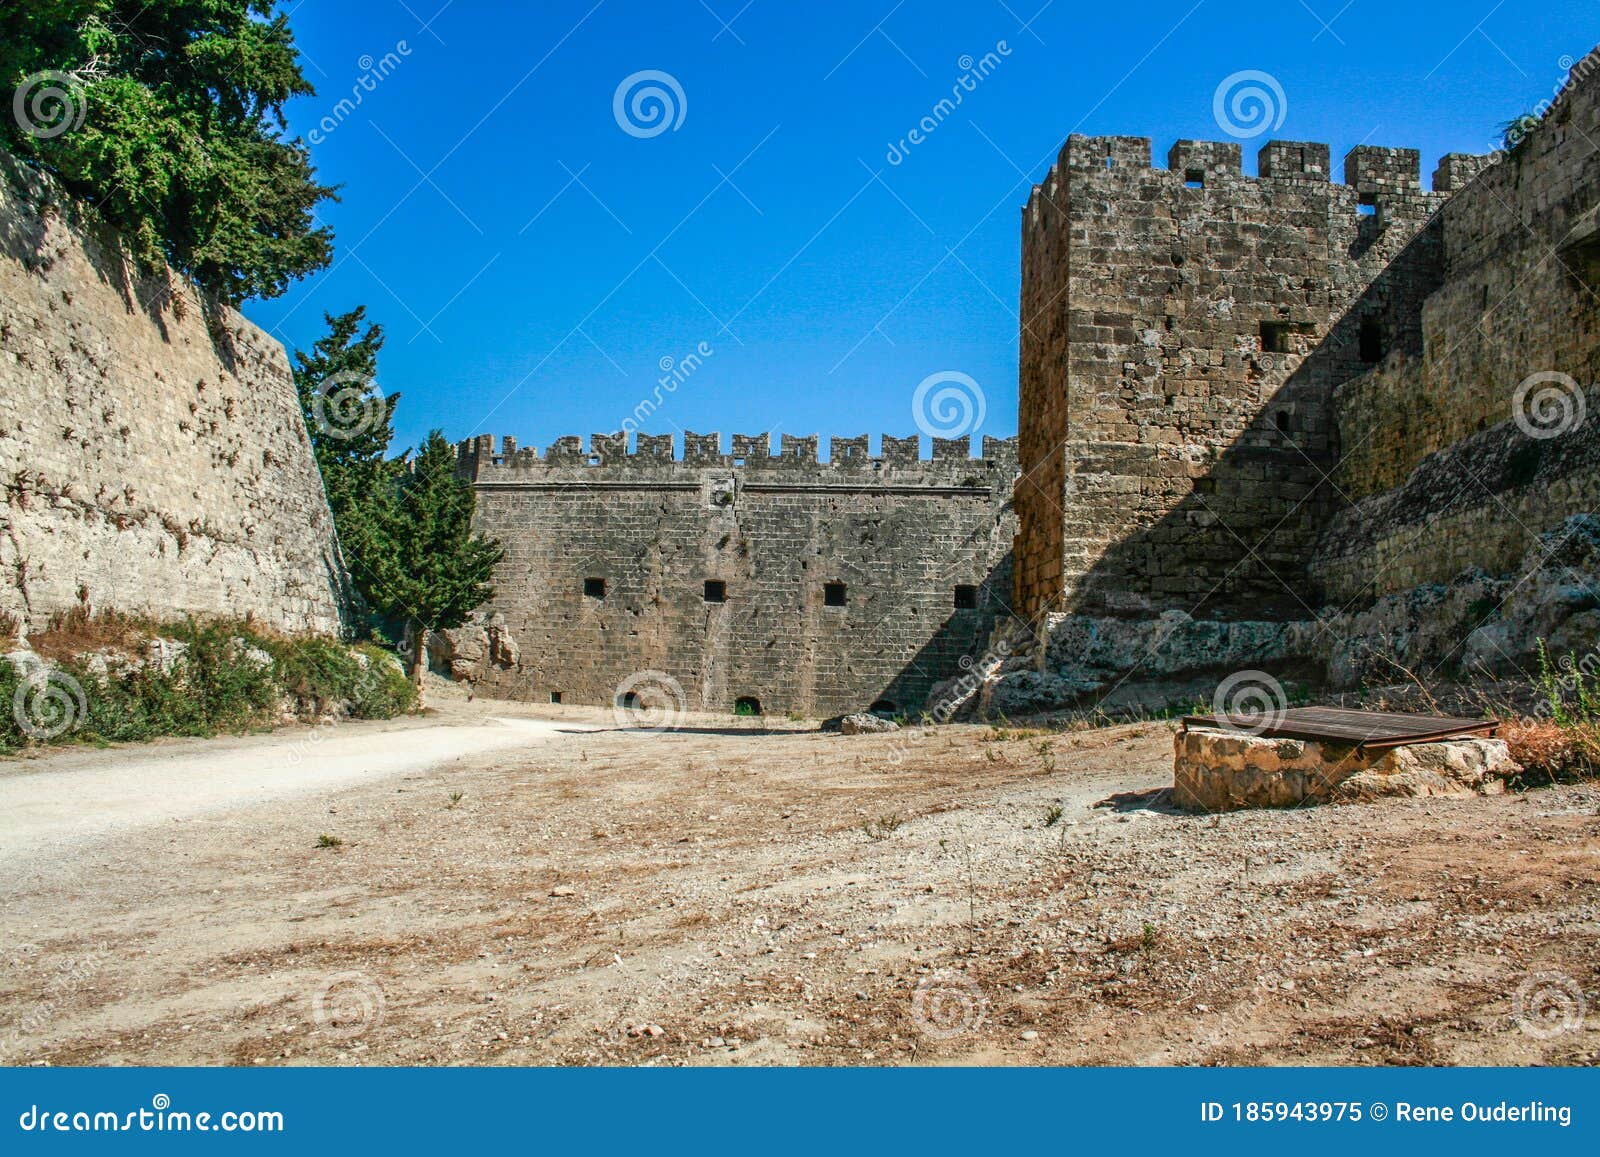 ancient citywall of the greek town rodos in greece